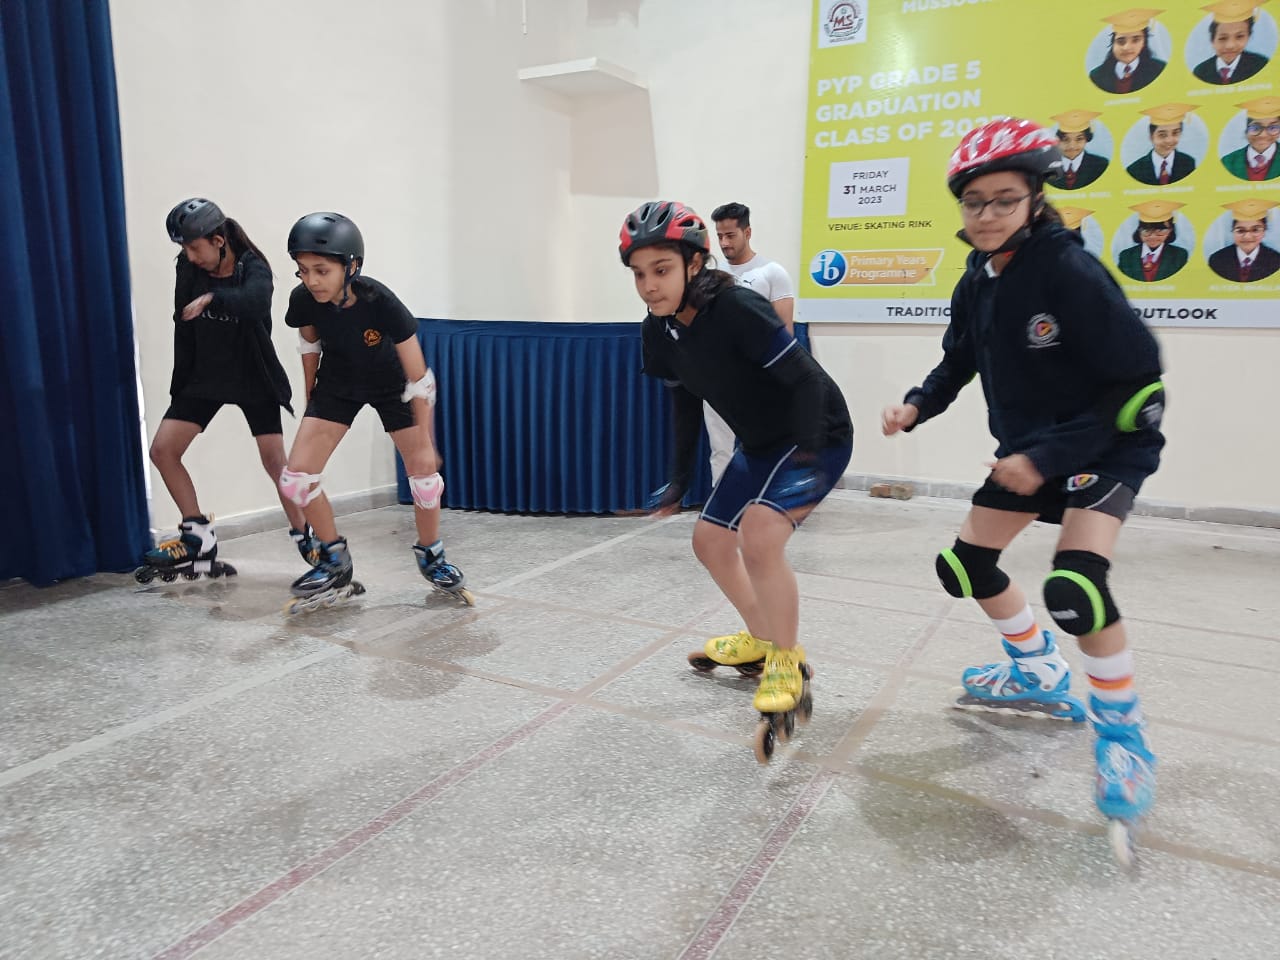 Mussoorie International School recently hosted an inter school skating competition successfully